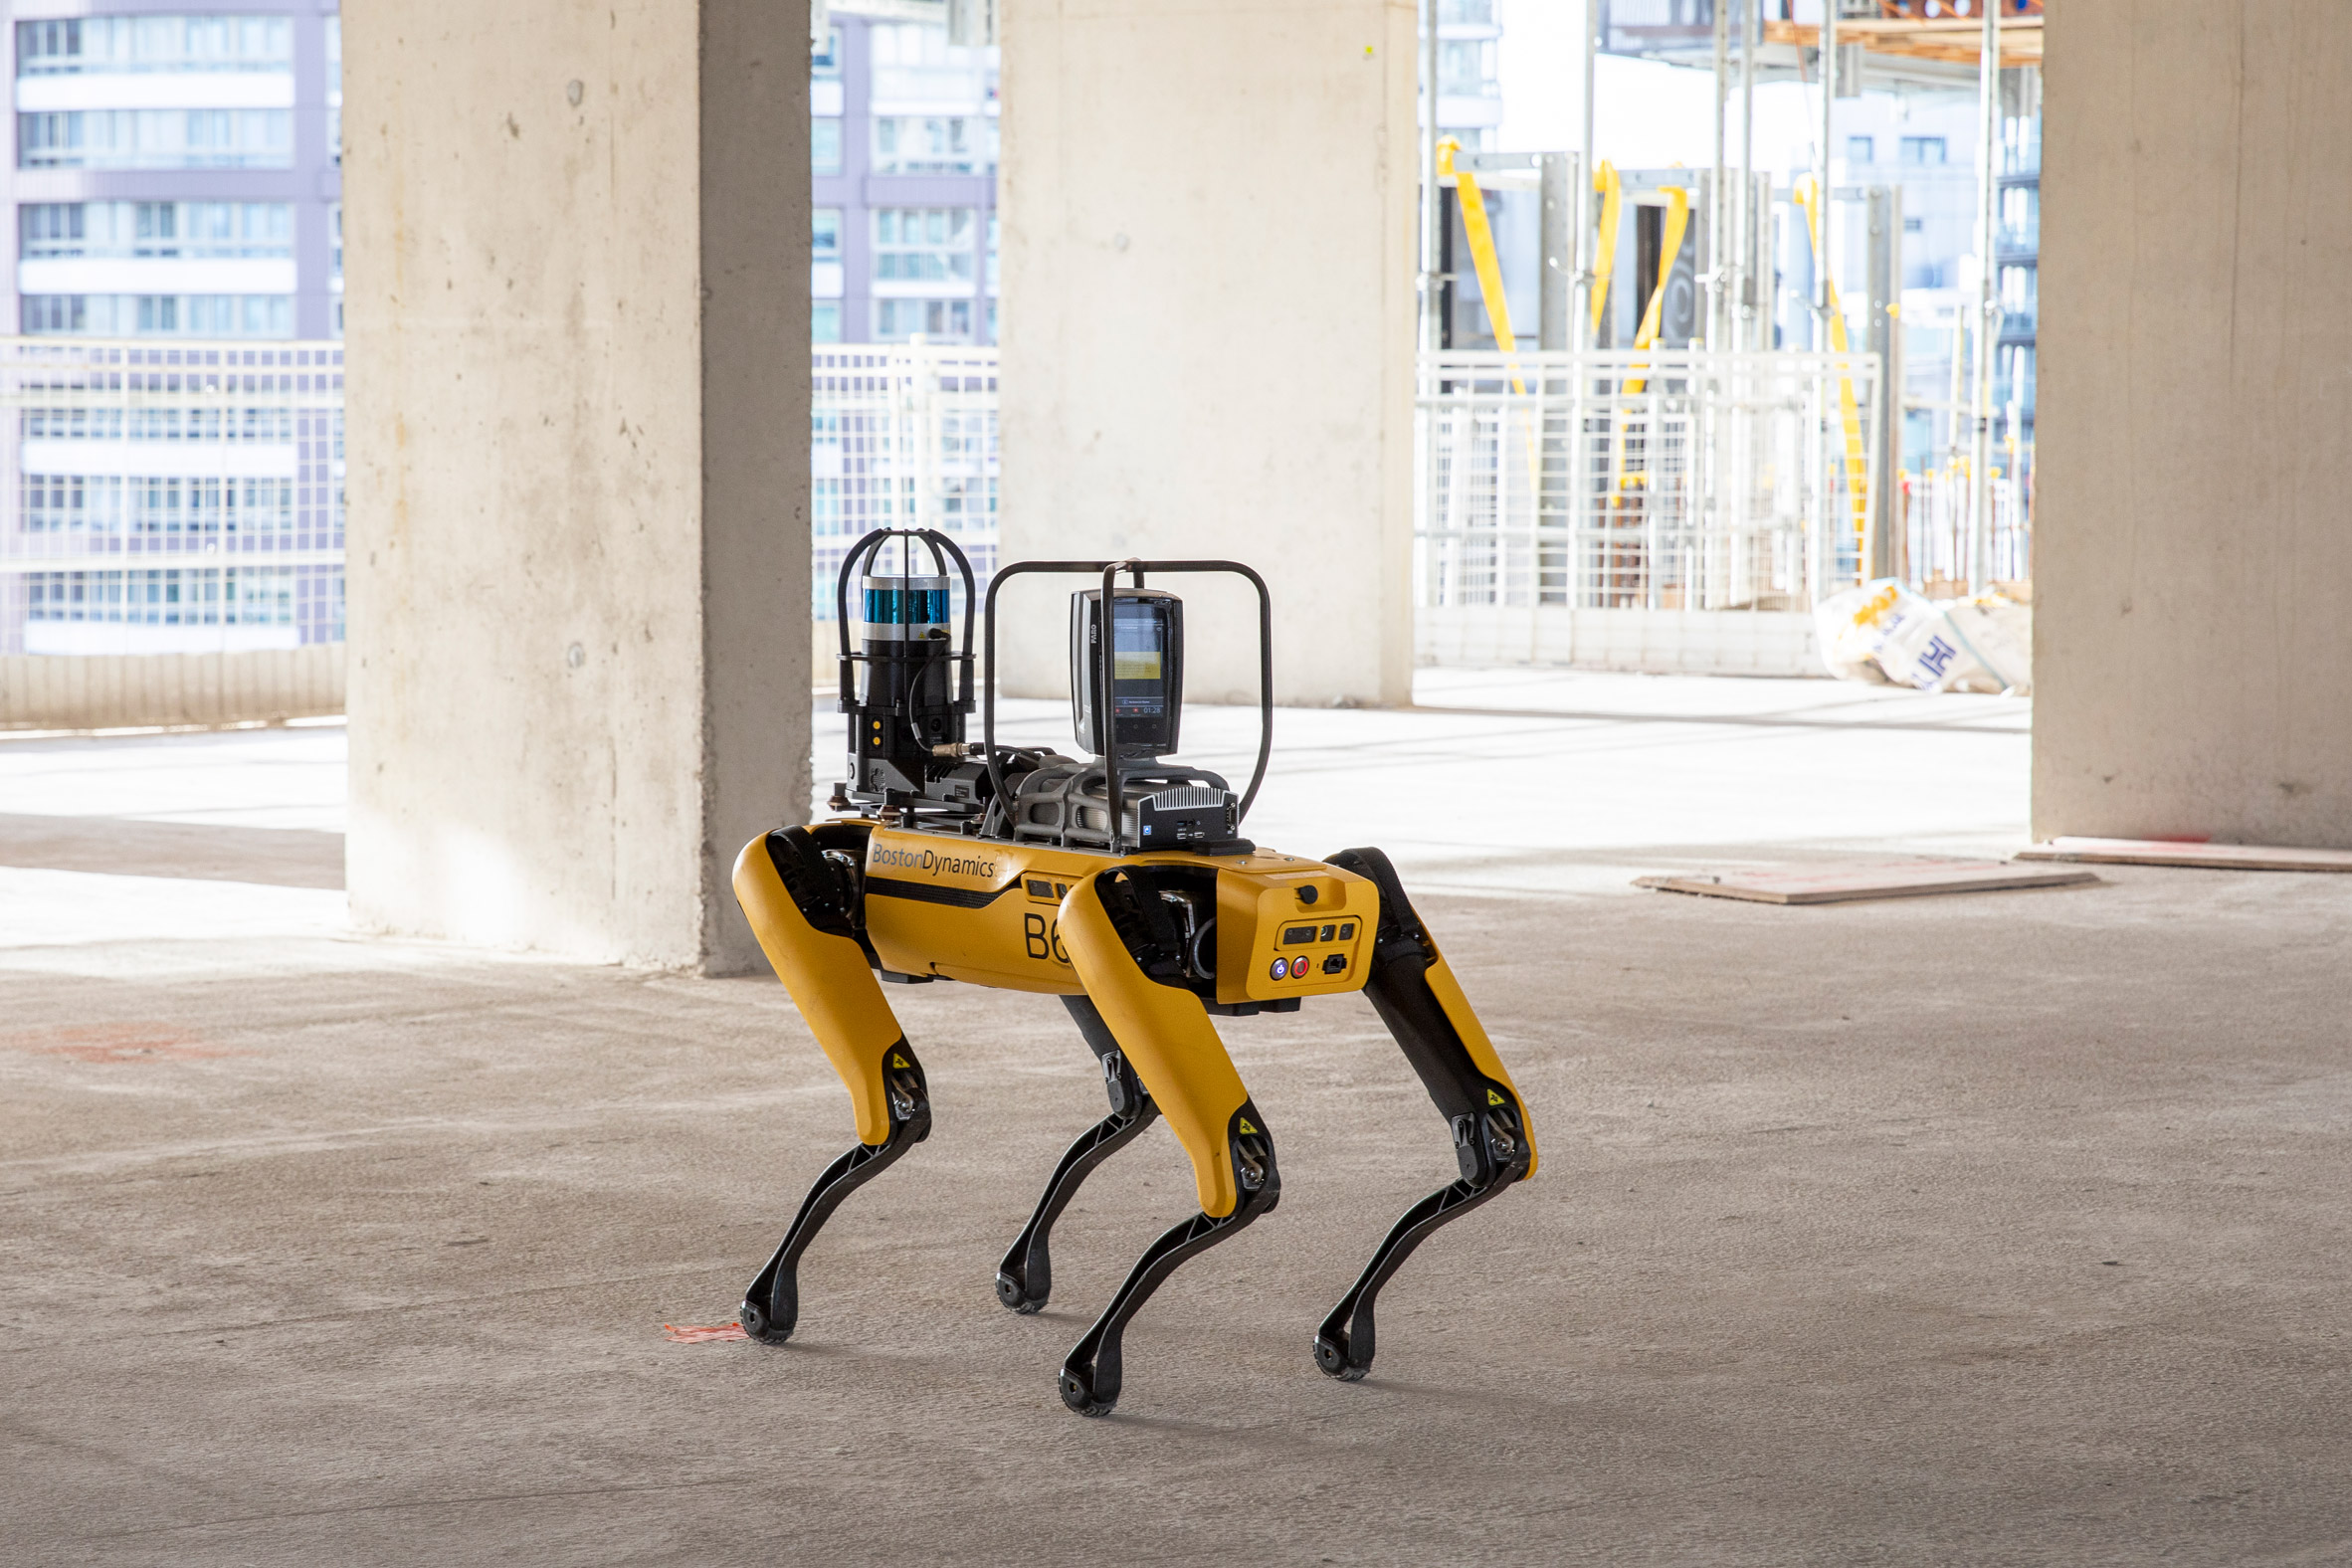 Boston Dynamics and Foster + Partners collaborated to use Spot the robot